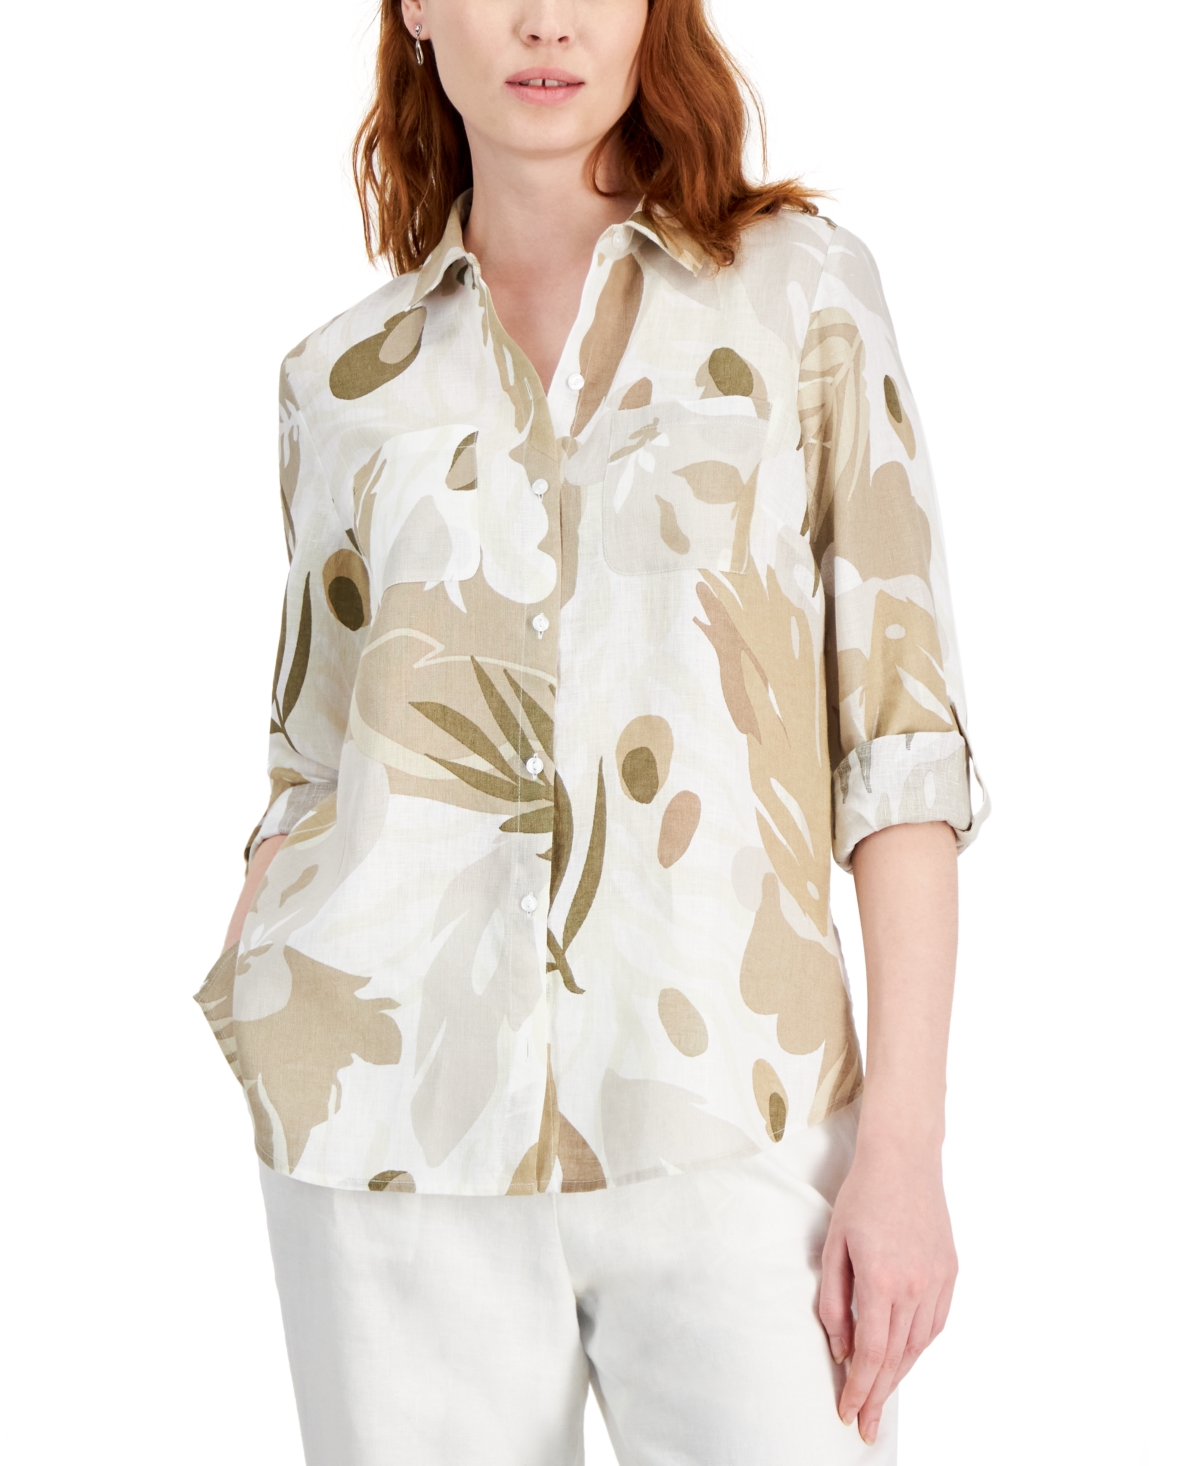 Women's 100% Linen Roll-Tab Button Shirt, Created for Macy's - Meadow Trail Combo